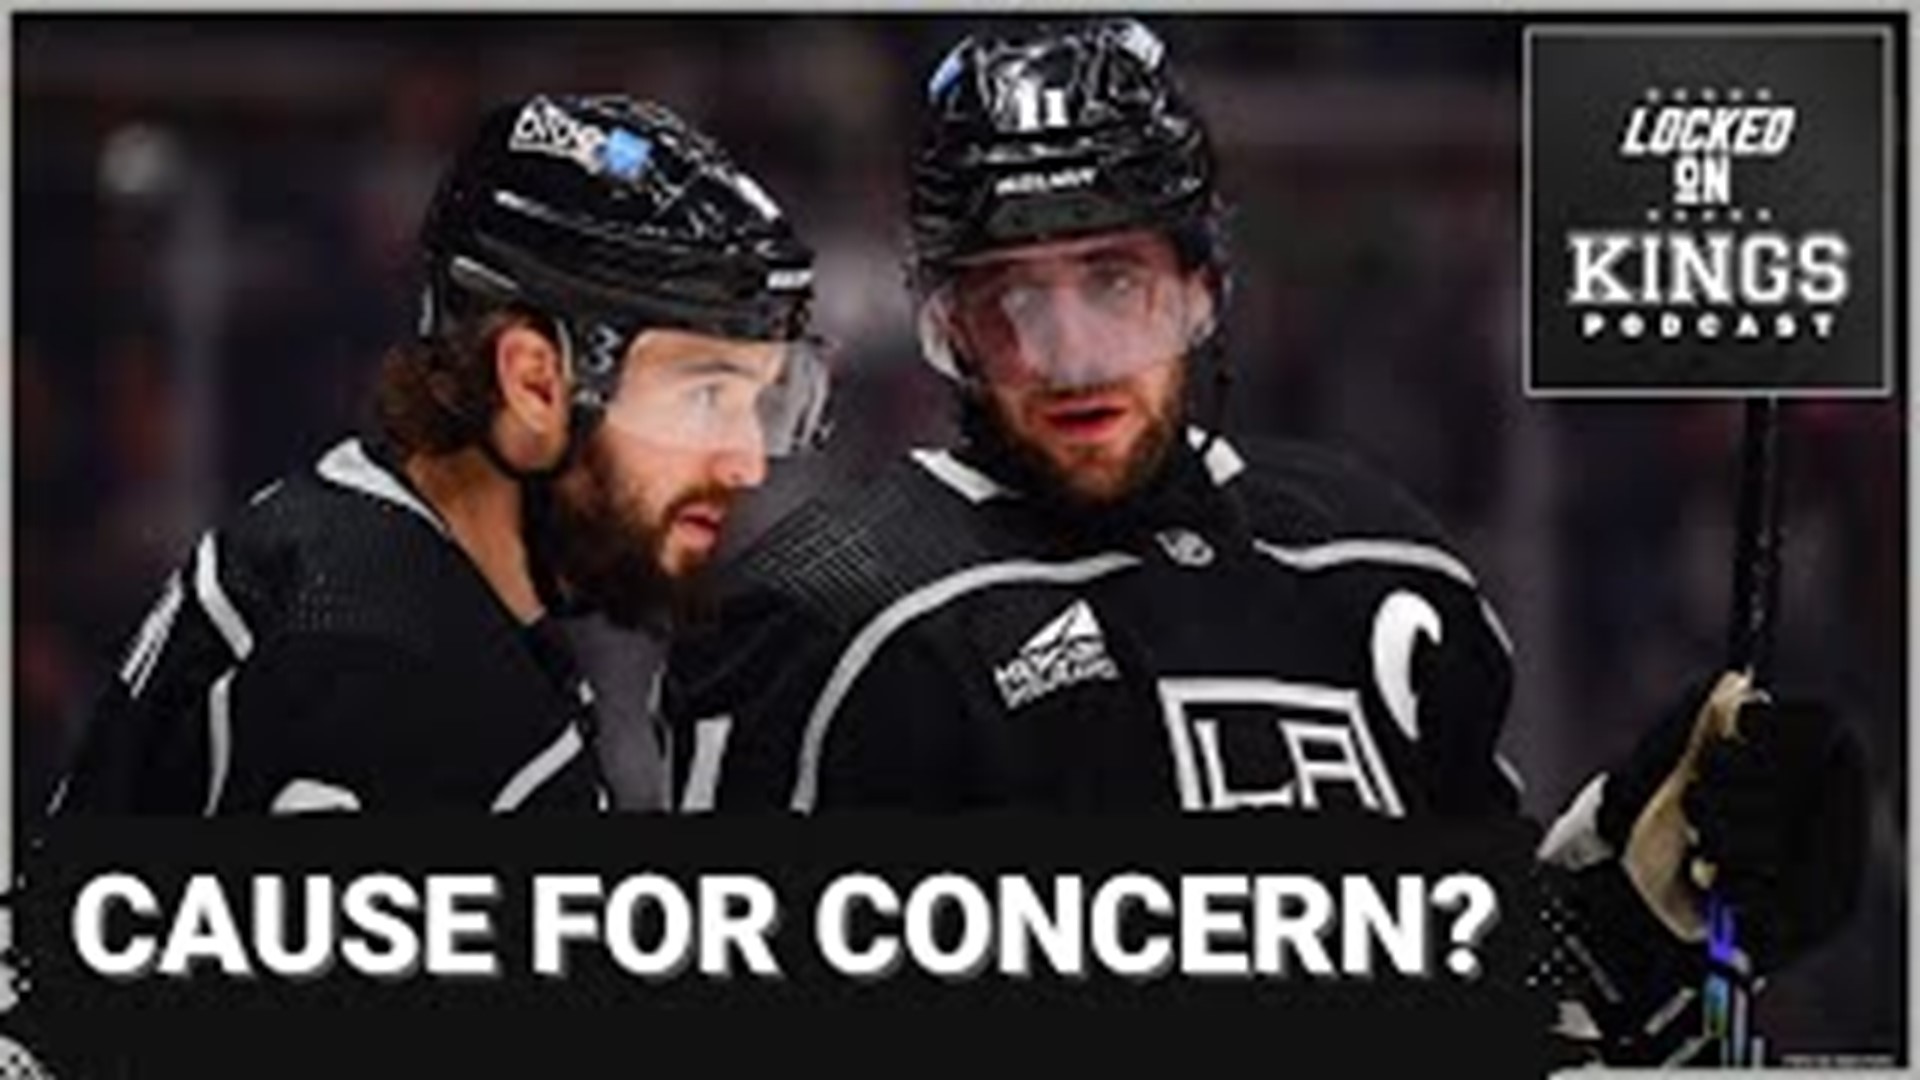 The Kings stumble against the Wild. How concerned should we be about how this team is playing going into the playoffs? That, plus a check on recent Kings draft picks